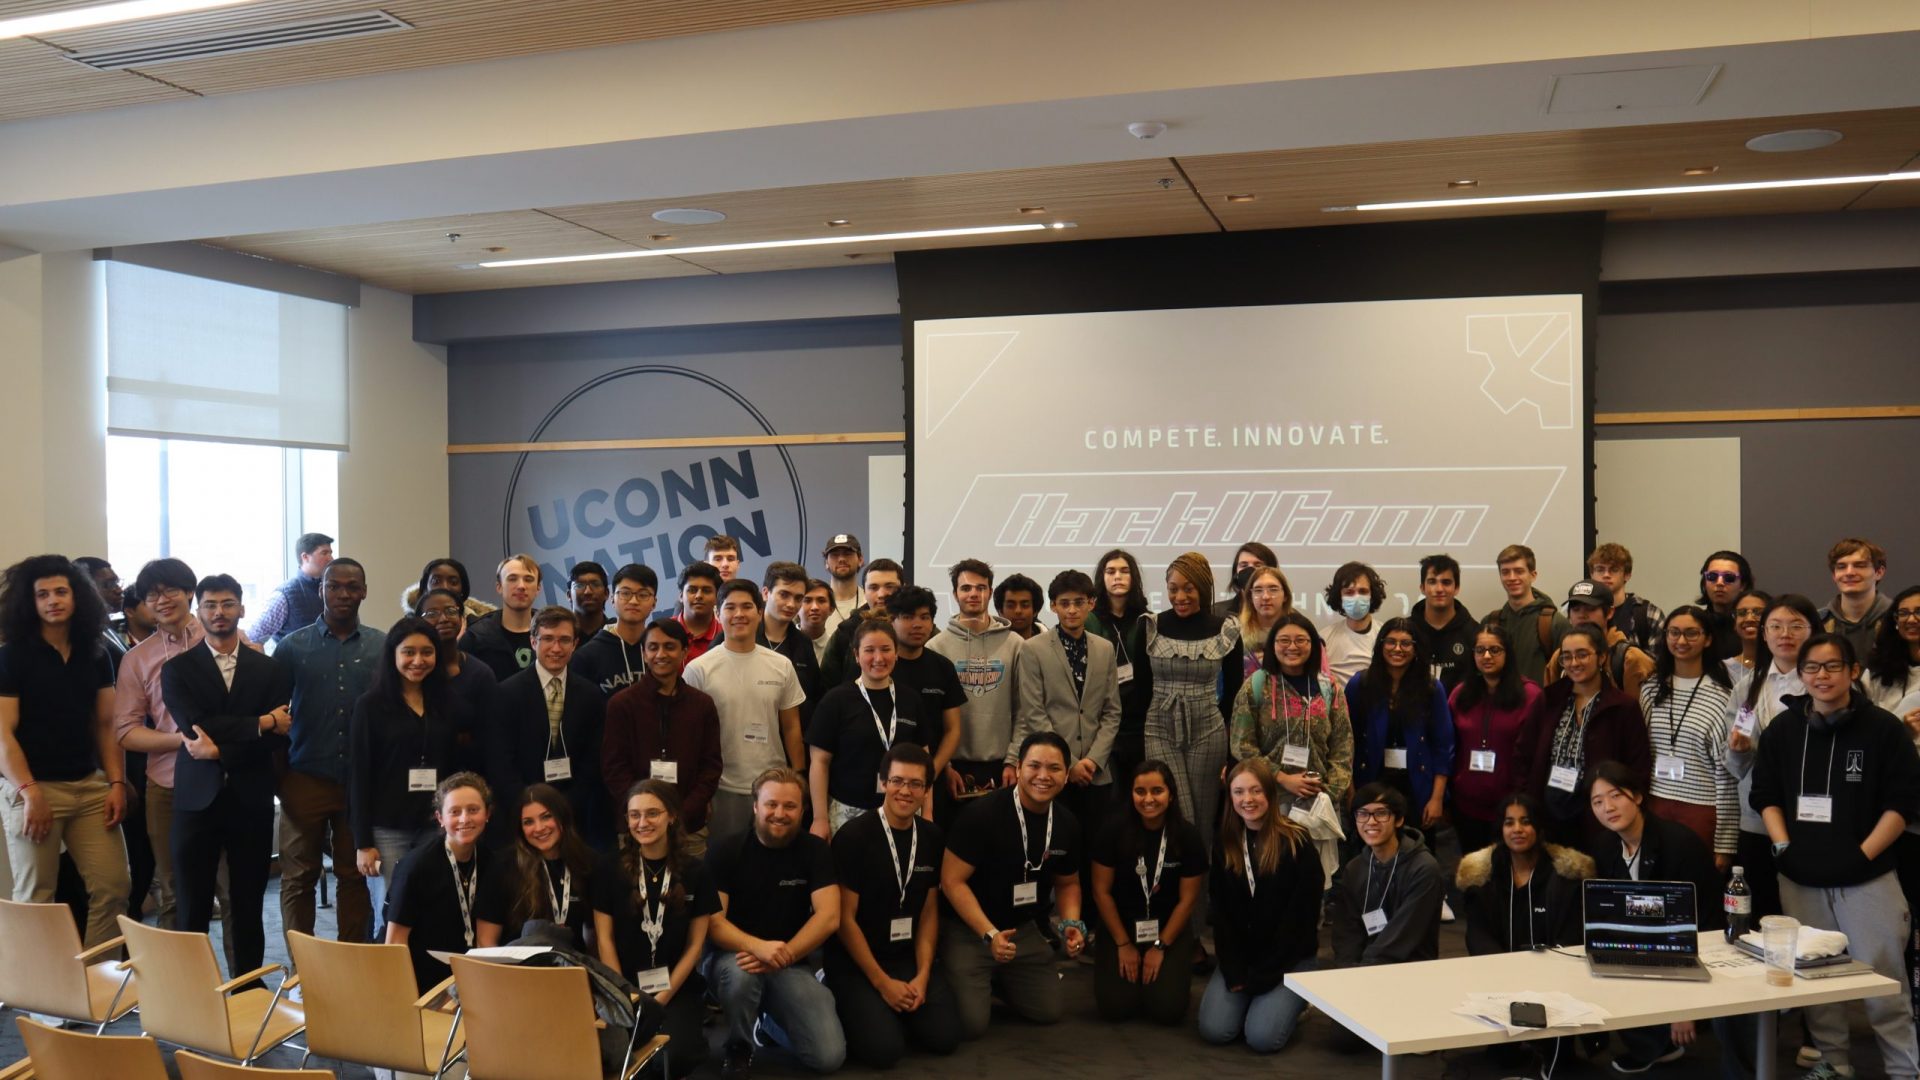 All teams at HackUConn pose for a photo at the end of the awards ceremony.